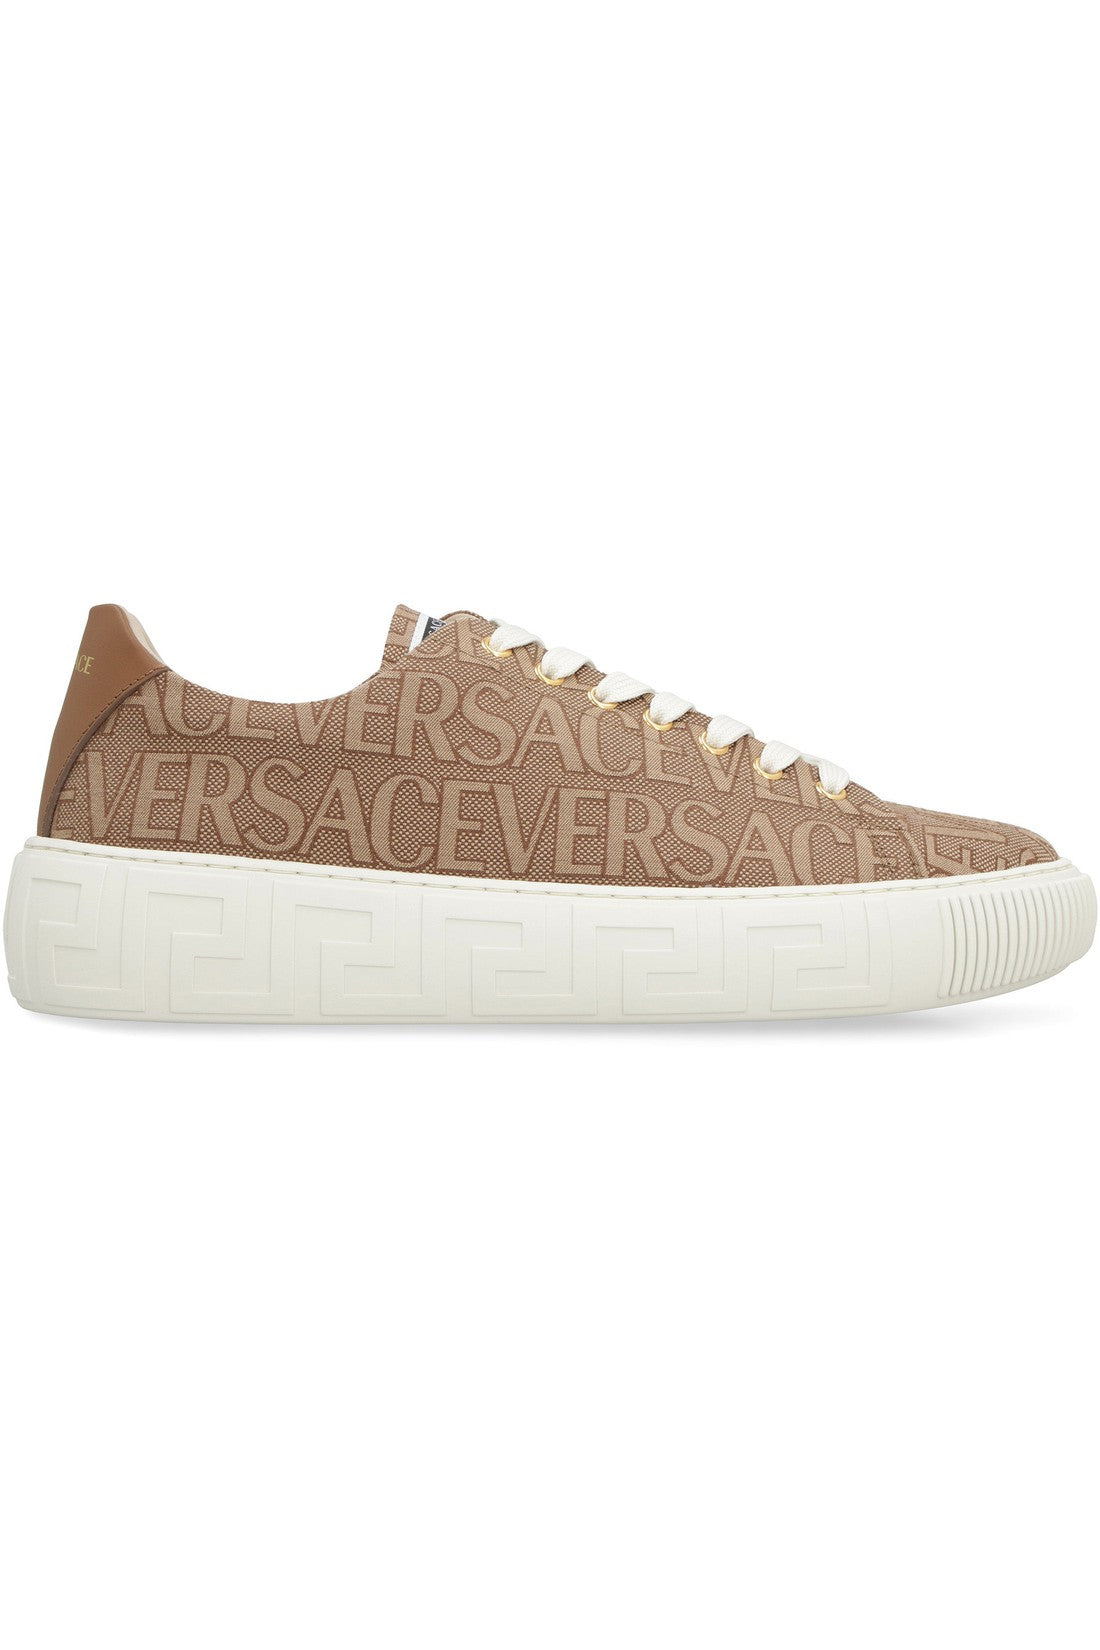 Versace-OUTLET-SALE-Fabric low-top sneakers-ARCHIVIST